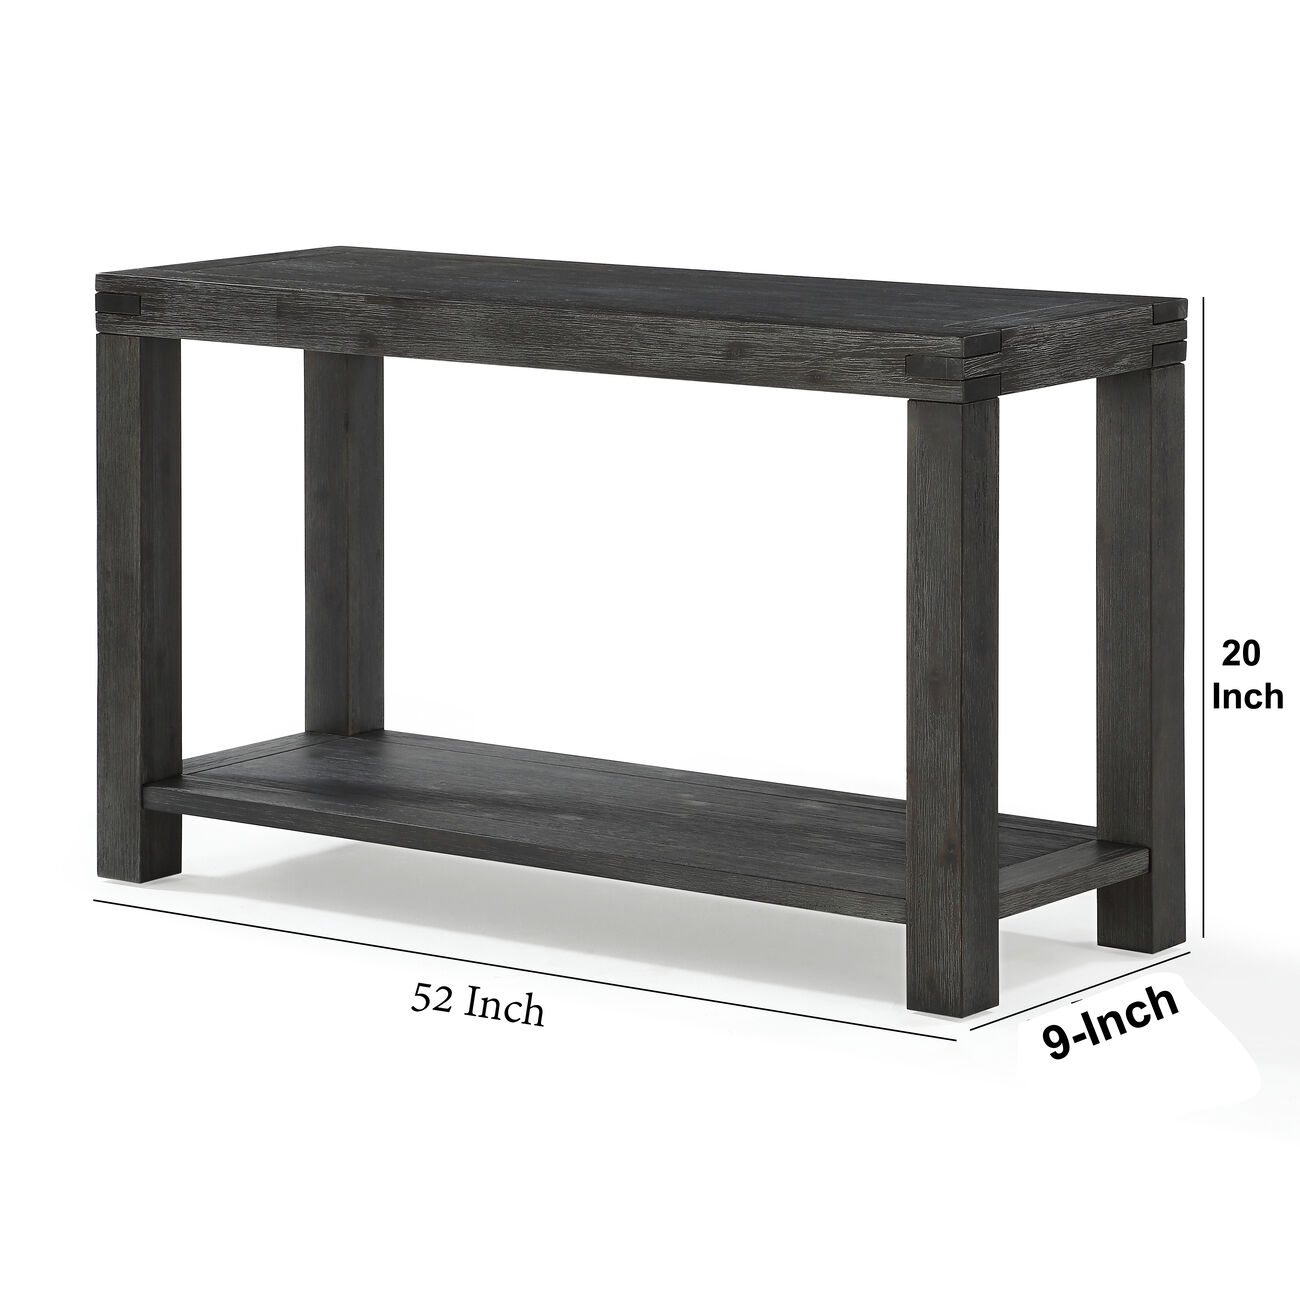 Wooden Console Table with Block Legs and Open Shelf, Dark Gray